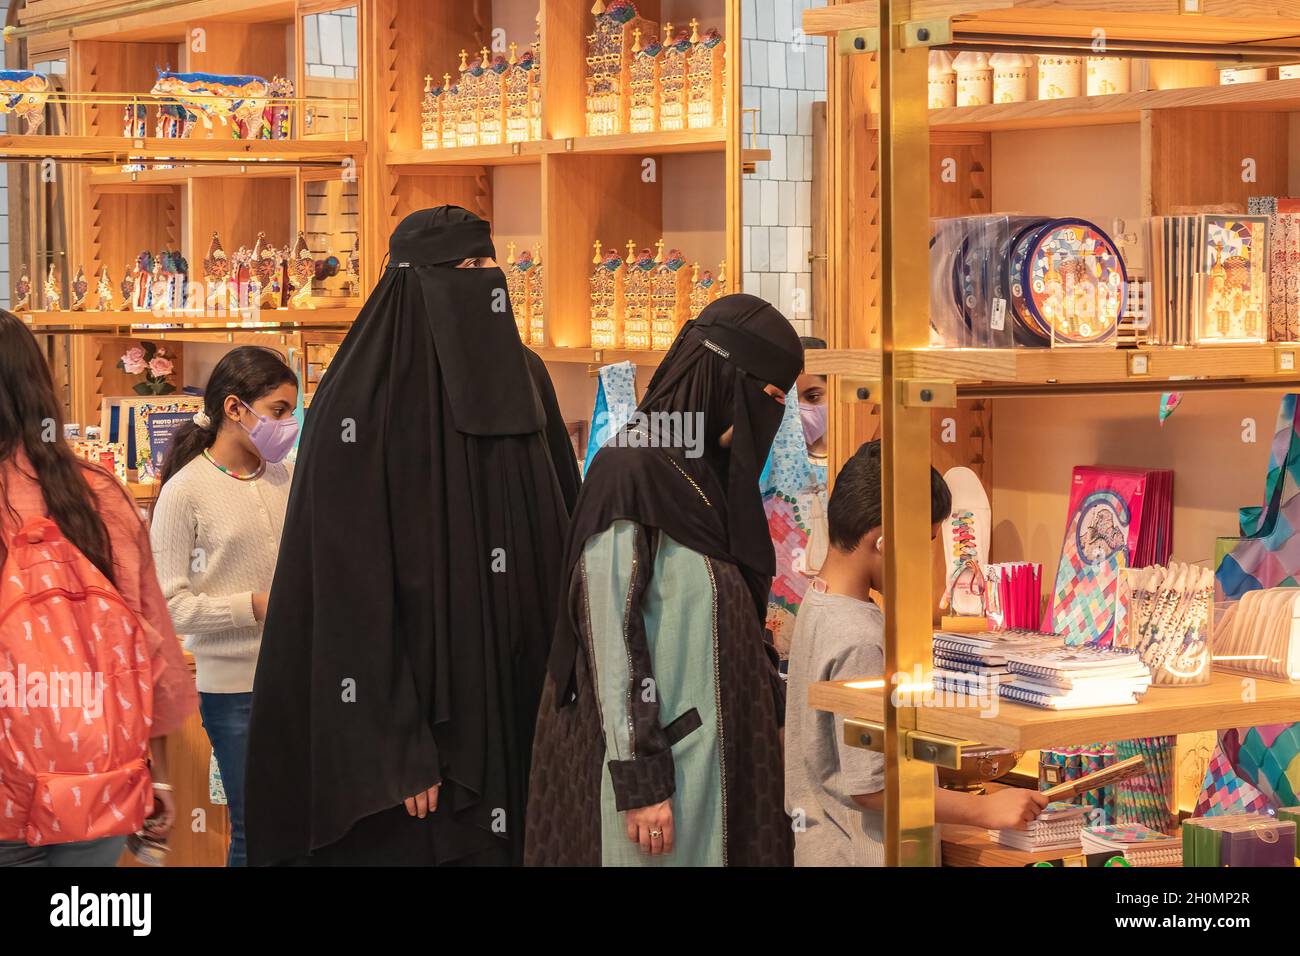 Barcelona, Spain - September 19, 2021: Muslim women wearing a Burka, traditional clothing worn by women in some Islamic countries, are shopping in a s Stock Photo